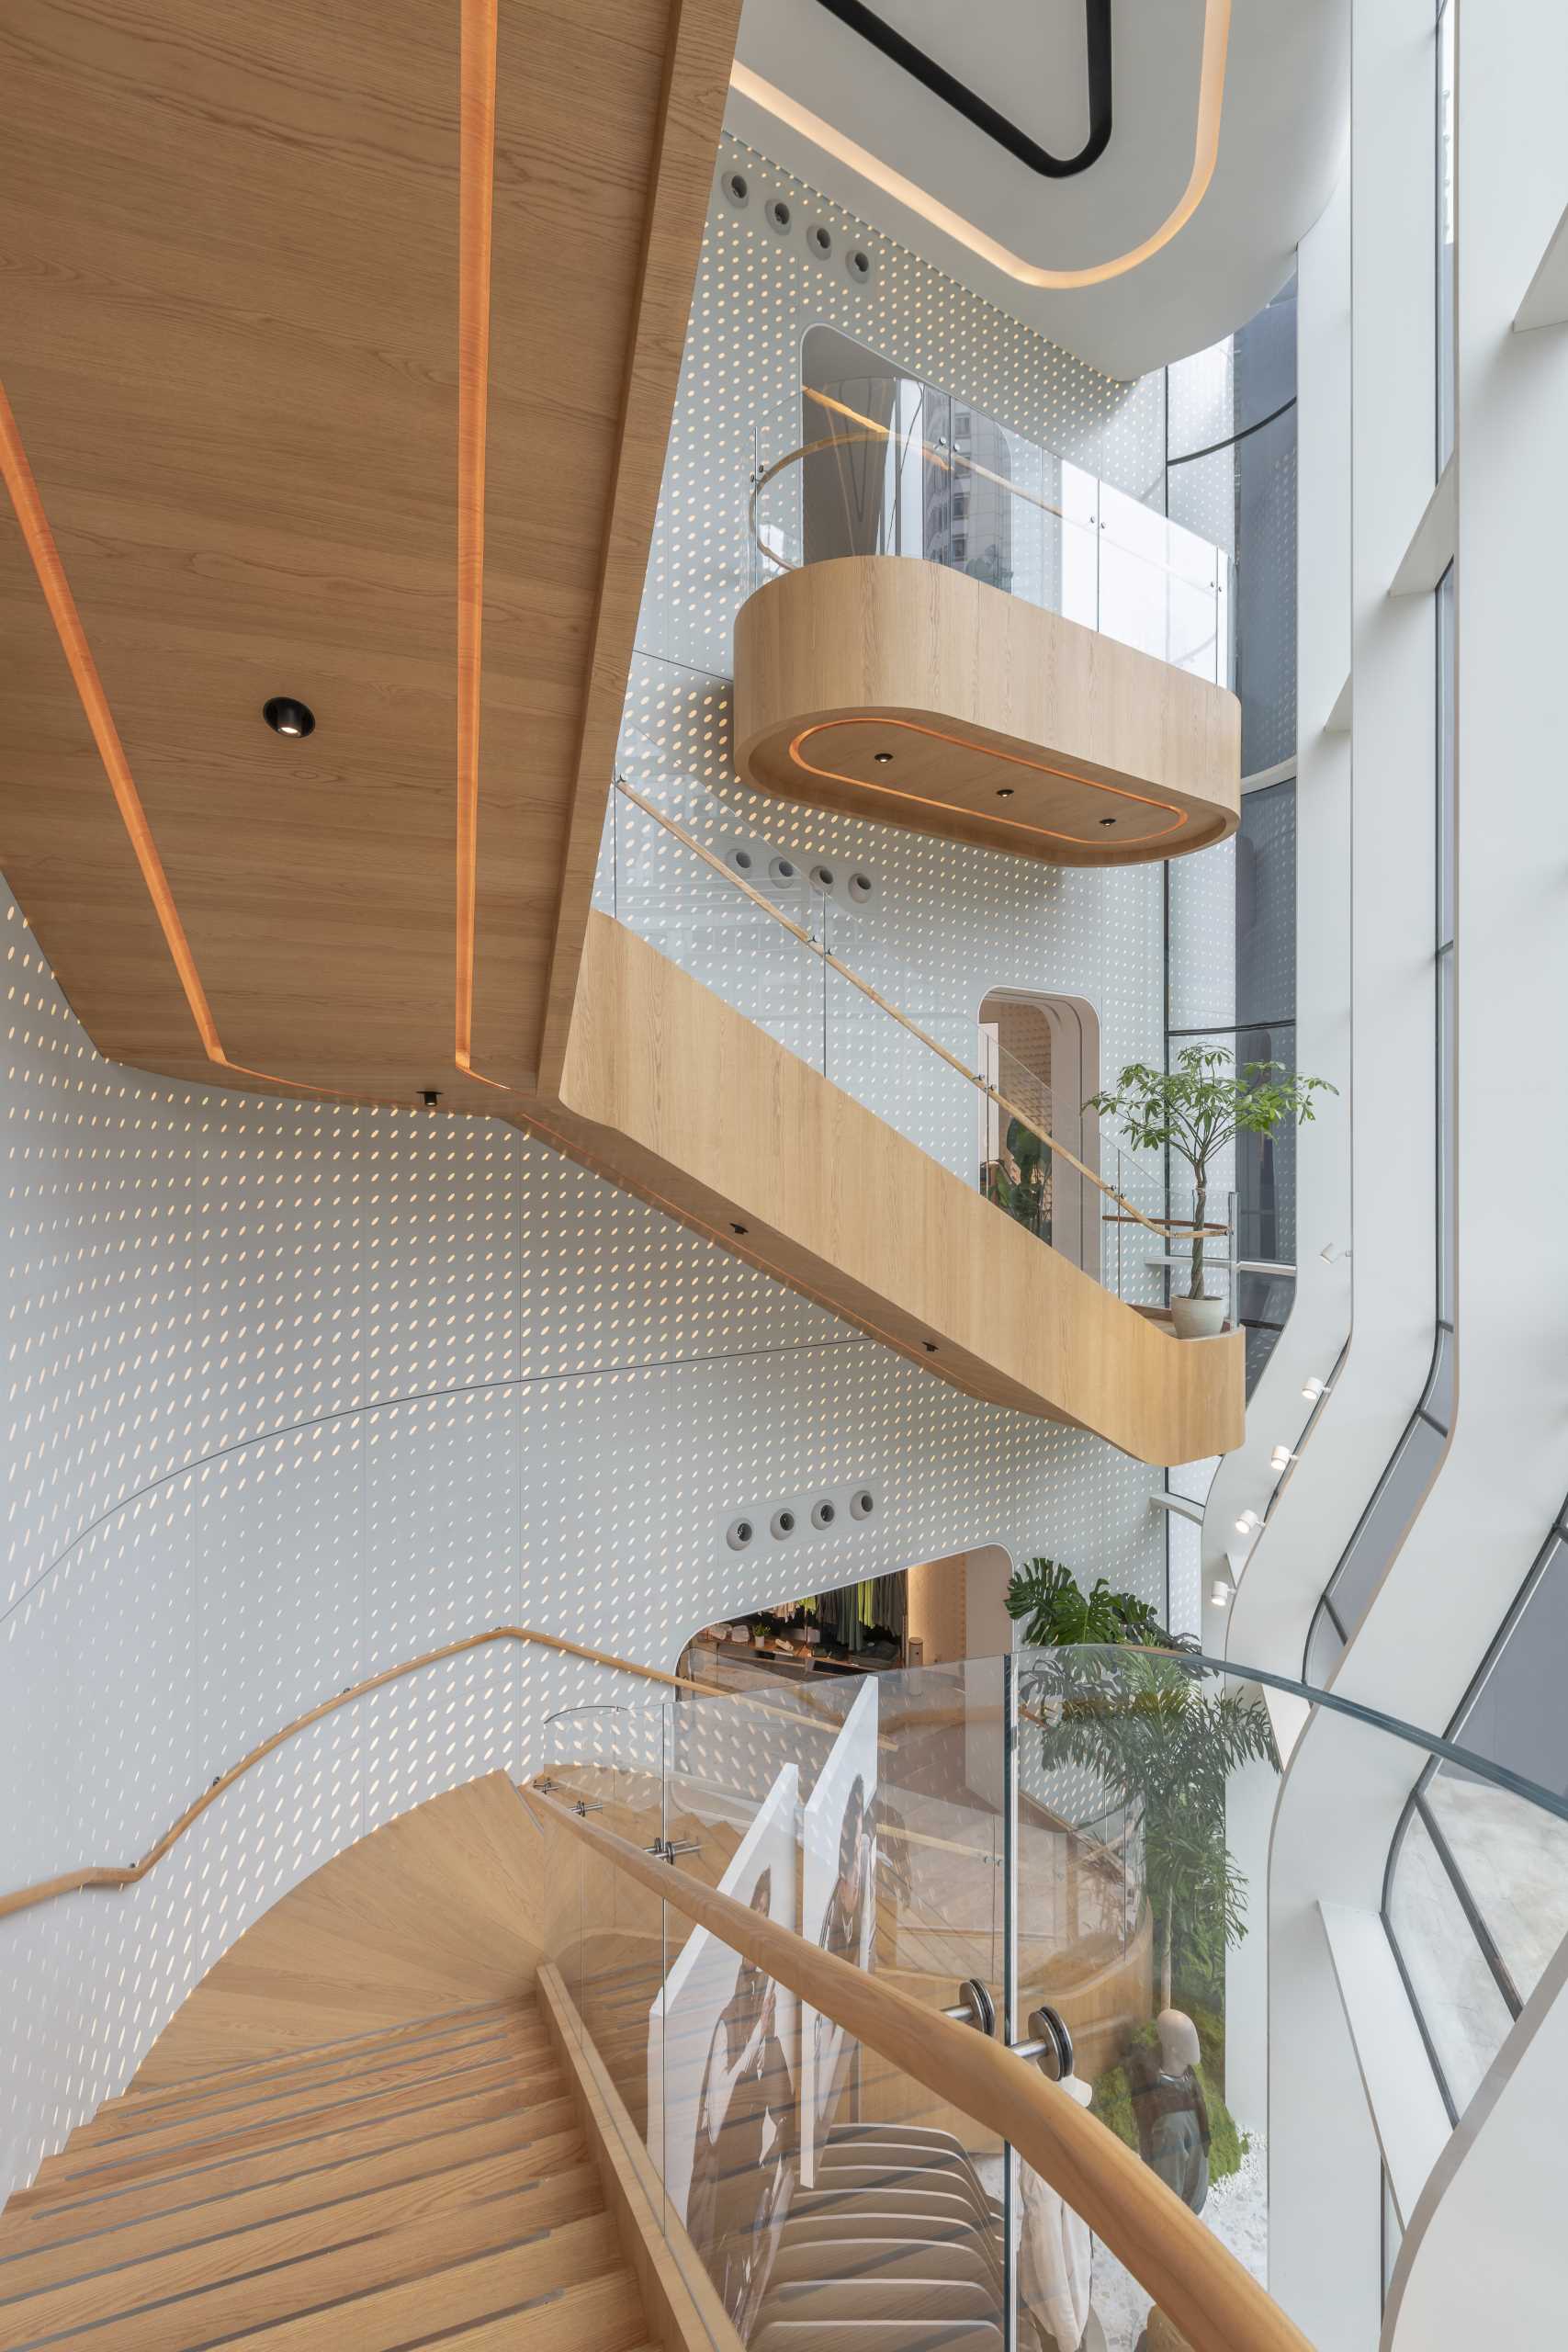 A modern Lululemon flag،p store has curved and patterned walls with a large staircase that connects the multiple floors.